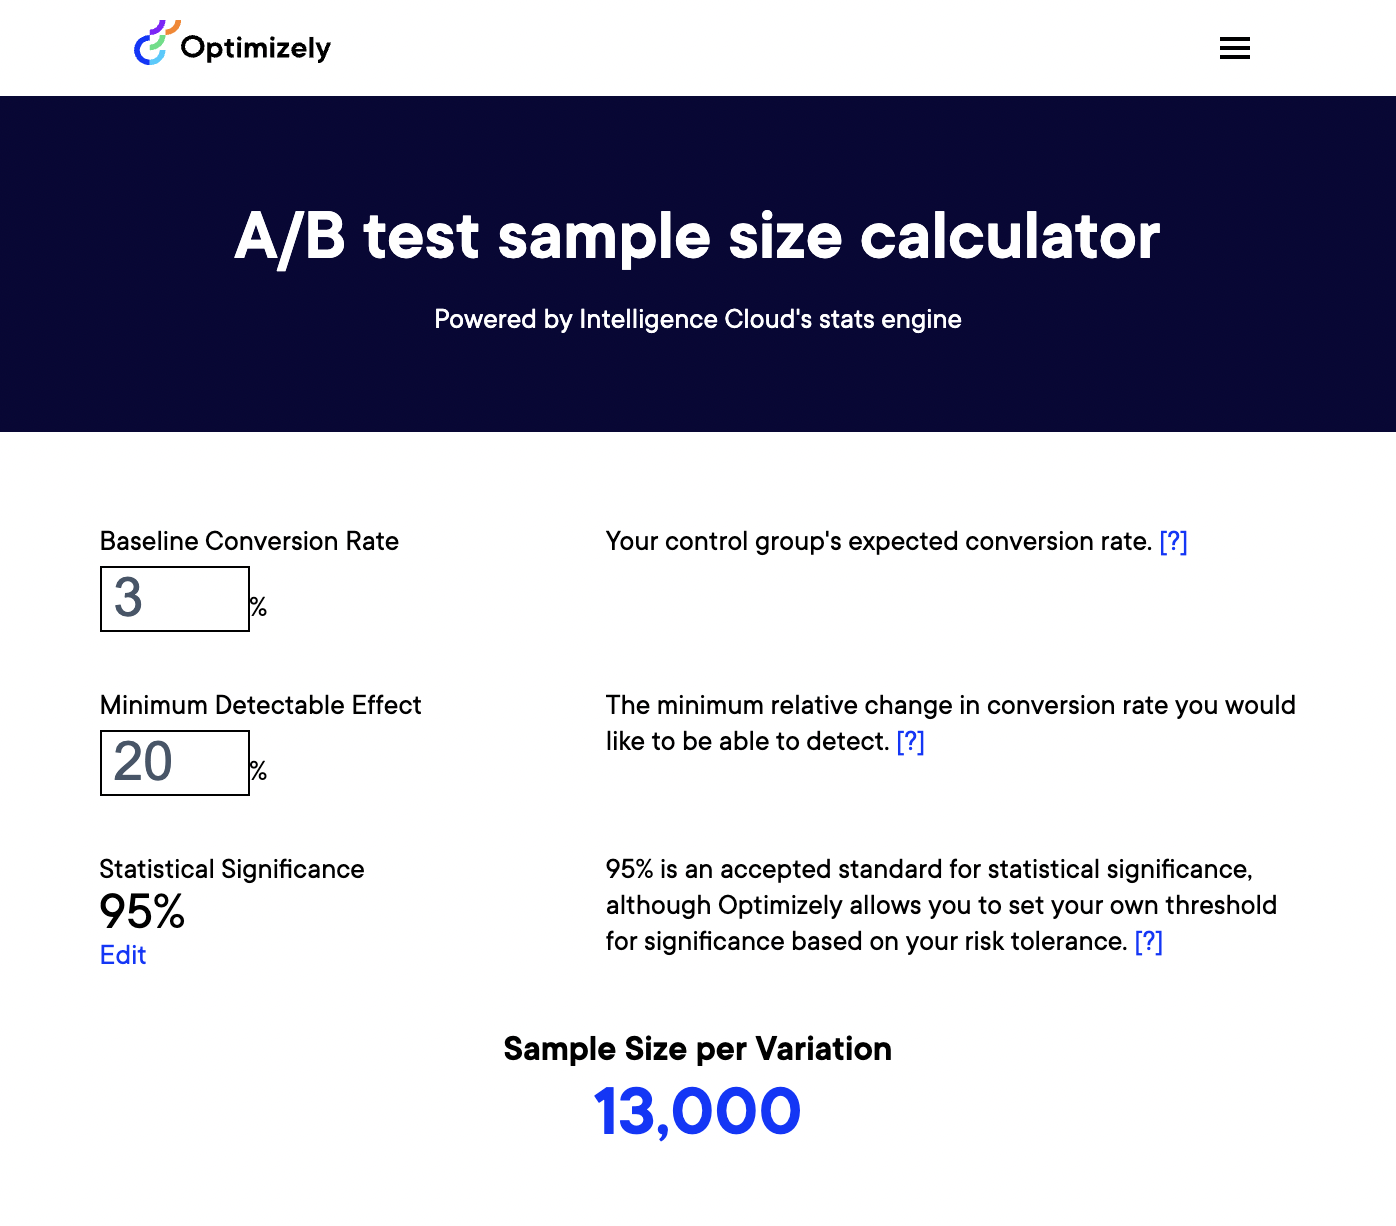 Calculate sample size using Optimizely’s calculator